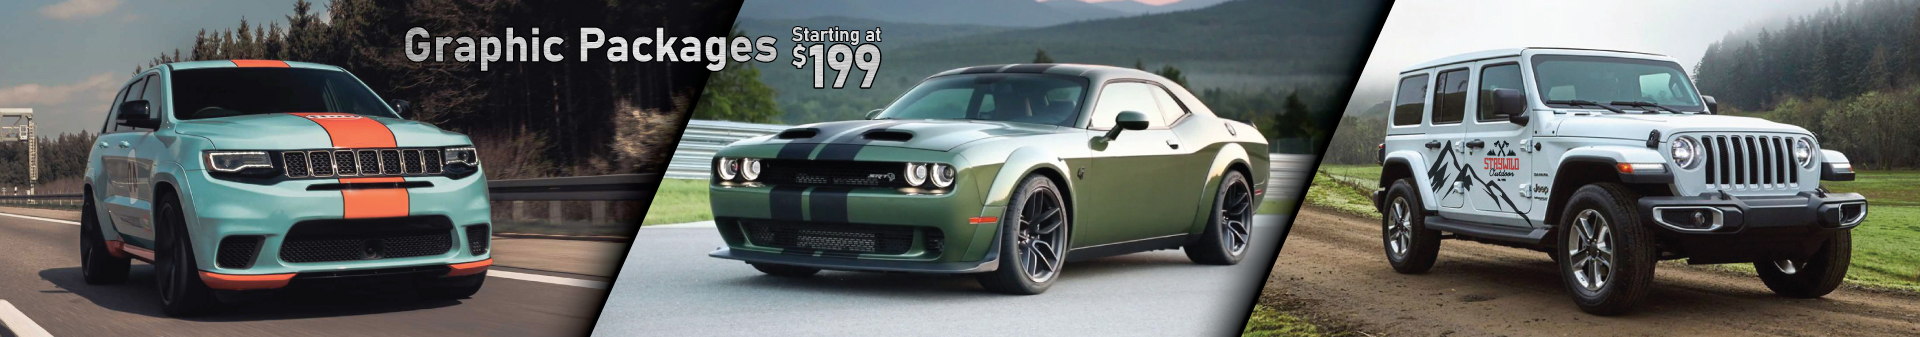 Partial Wraps, spot graphics, print cut decals, and more starting at $199